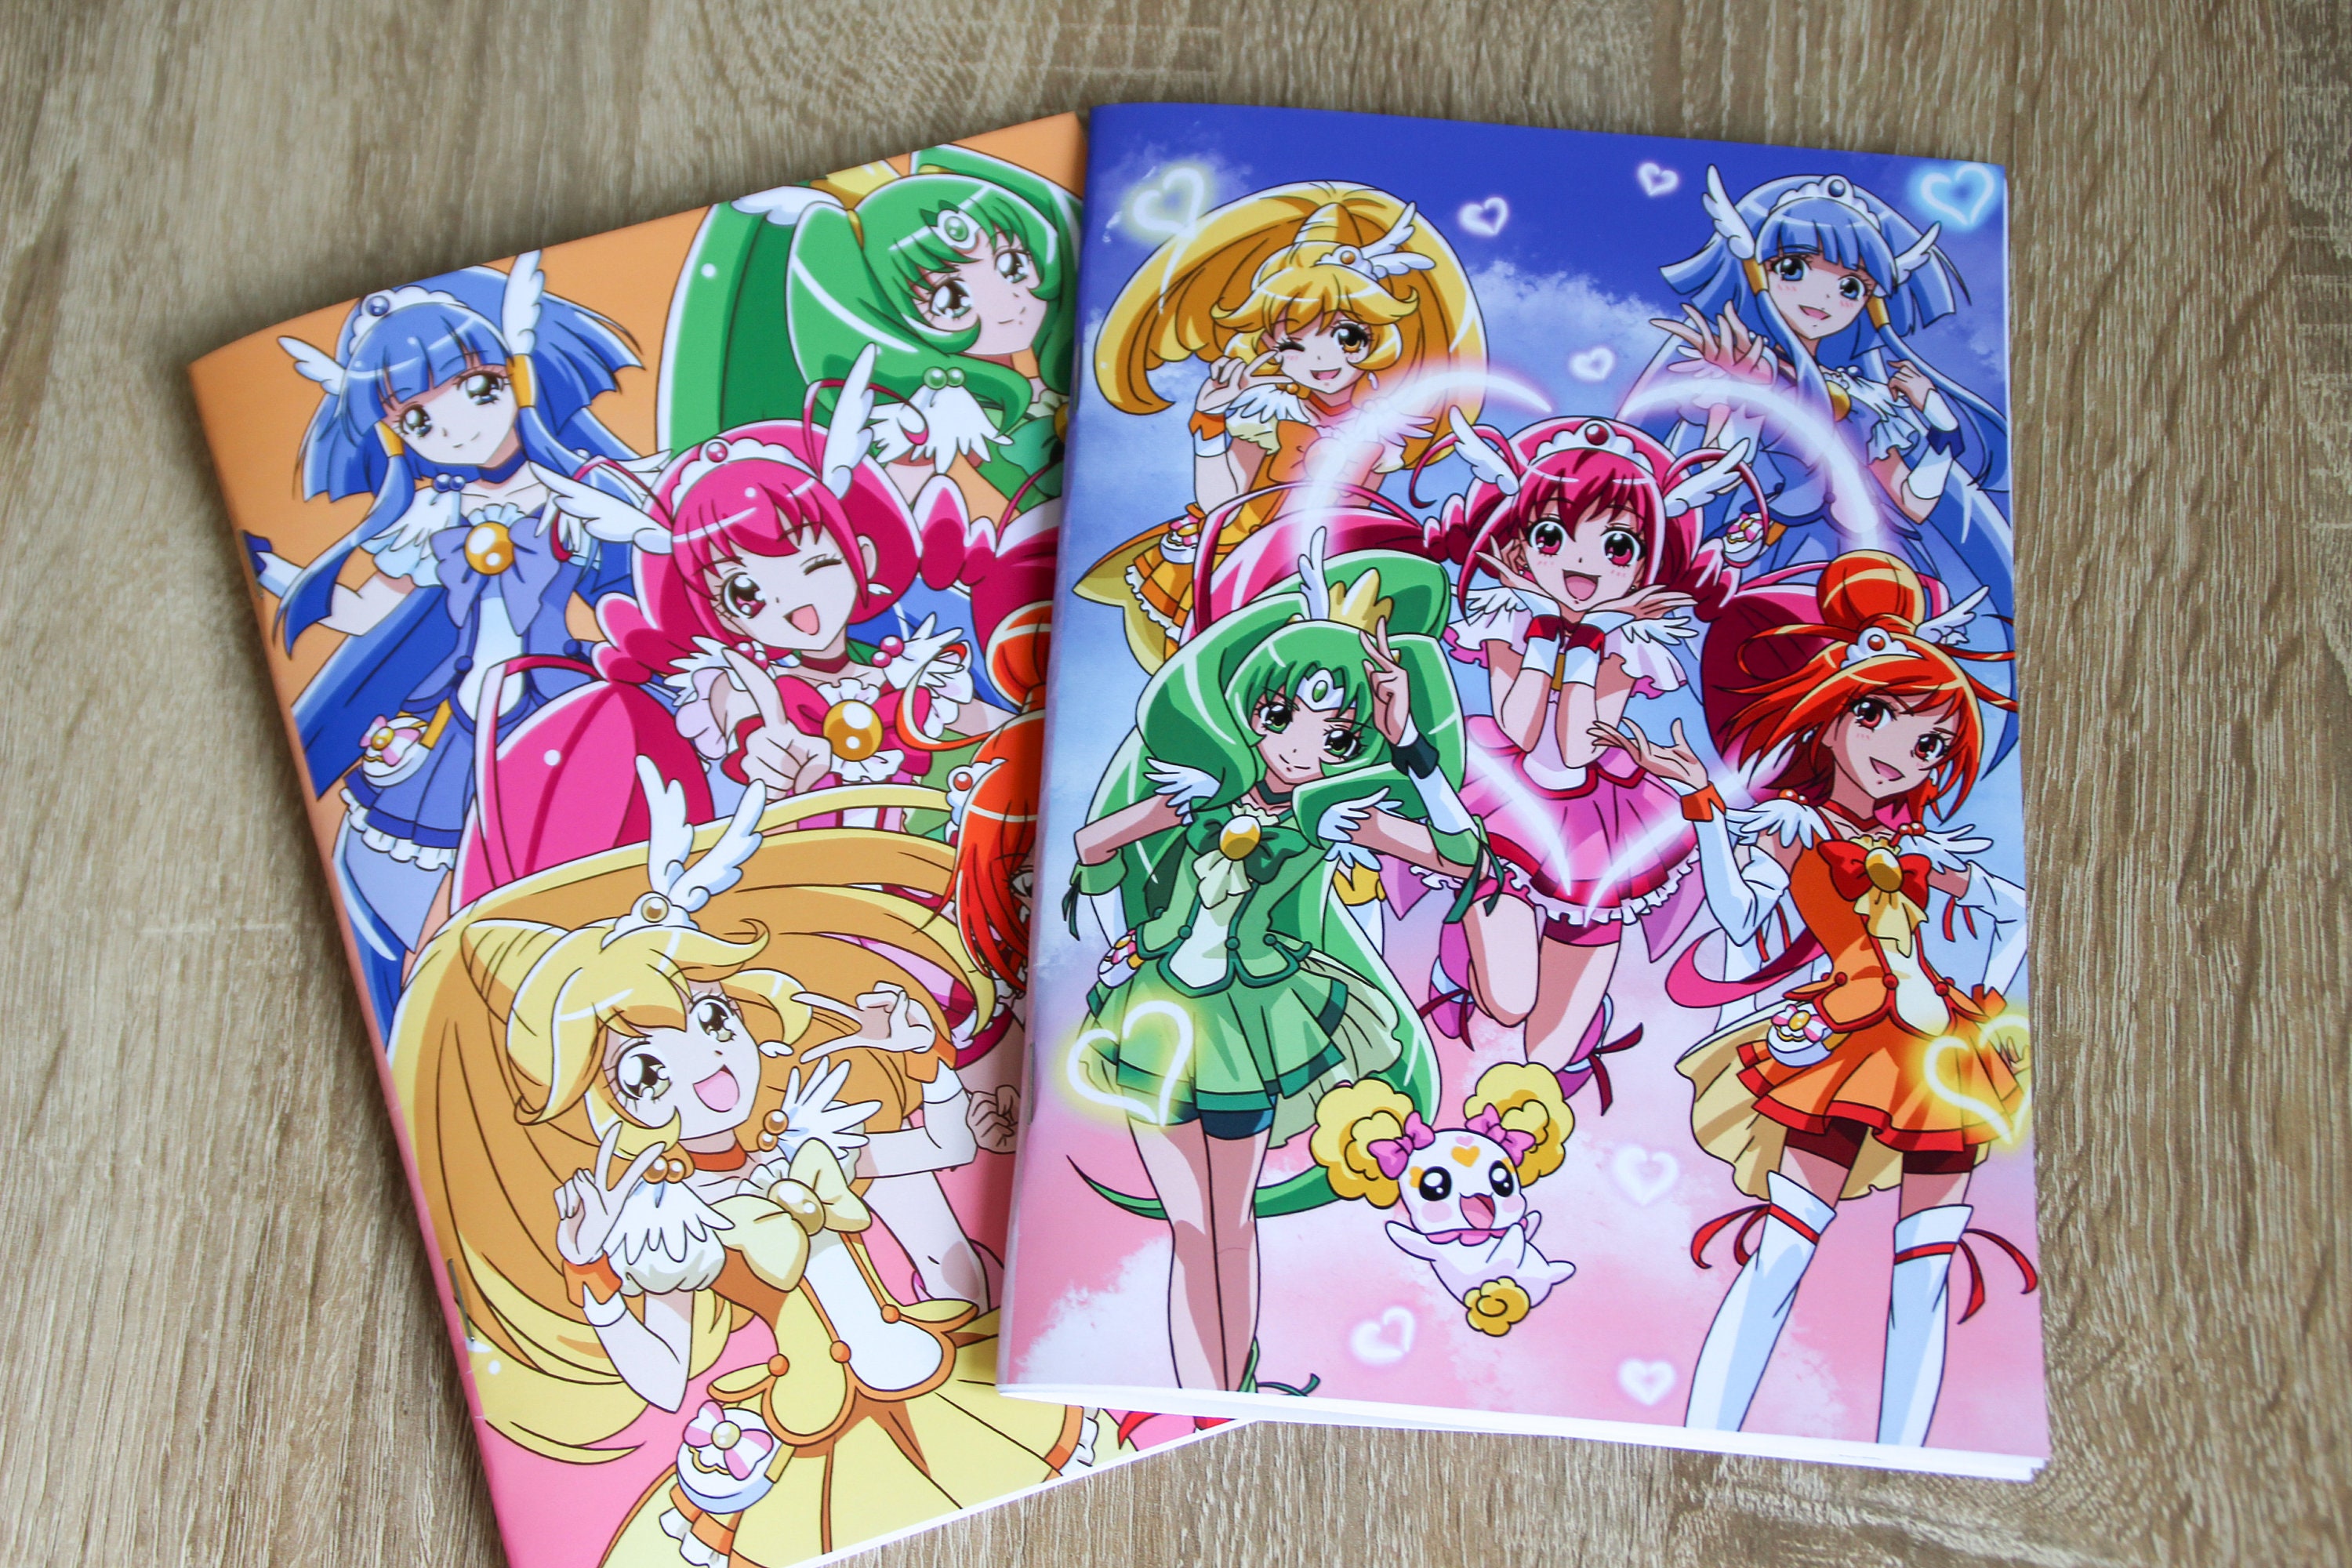 Every PreCure magical girl ever now appearing on awesome anime digital  mural in Tokyo【Pics, vid】